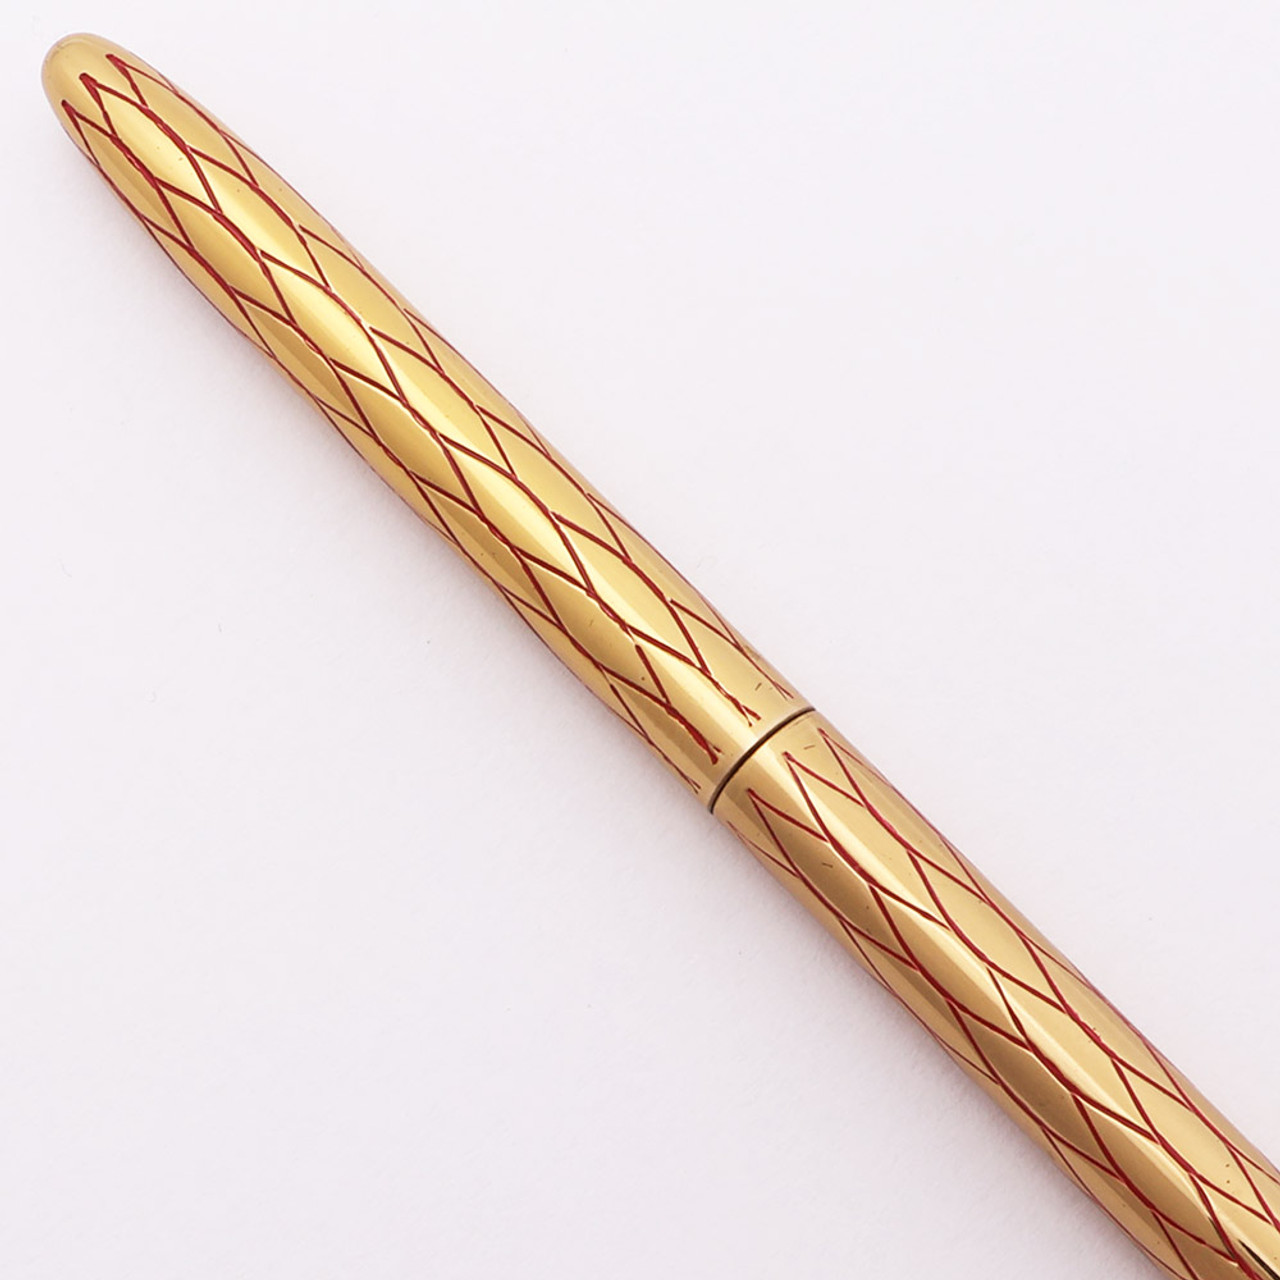 Lady Sheaffer IX Skripsert Mechanical Pencil (1960s) - Gold Red Tulle, 0.9 mm Leads (Excellent, Works Well)